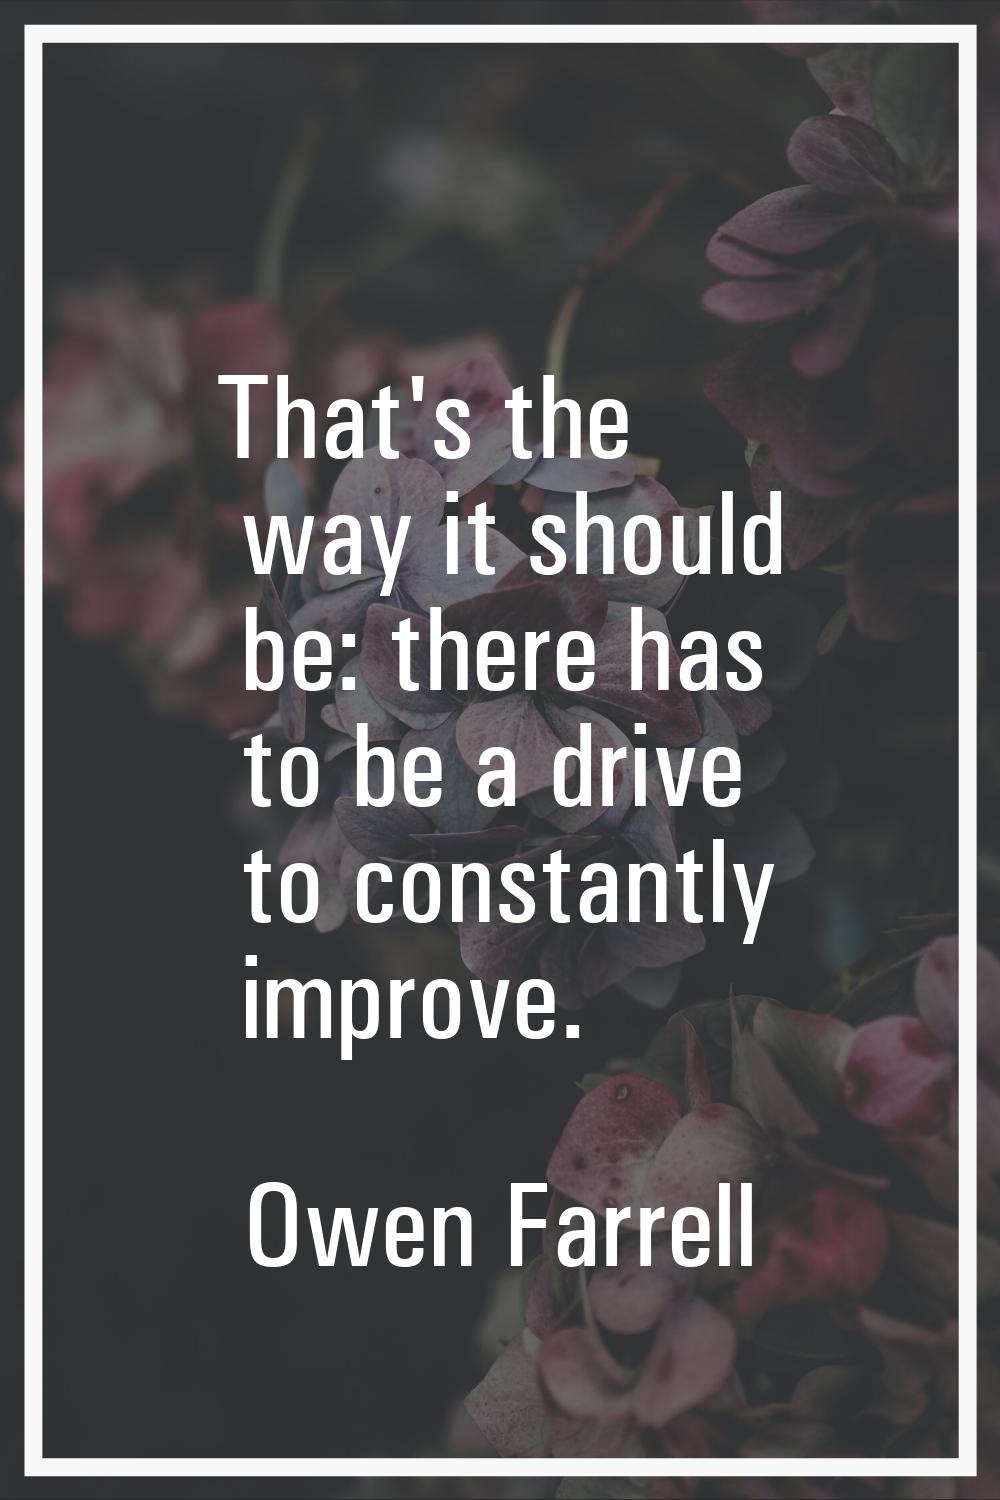 That's the way it should be: there has to be a drive to constantly improve.